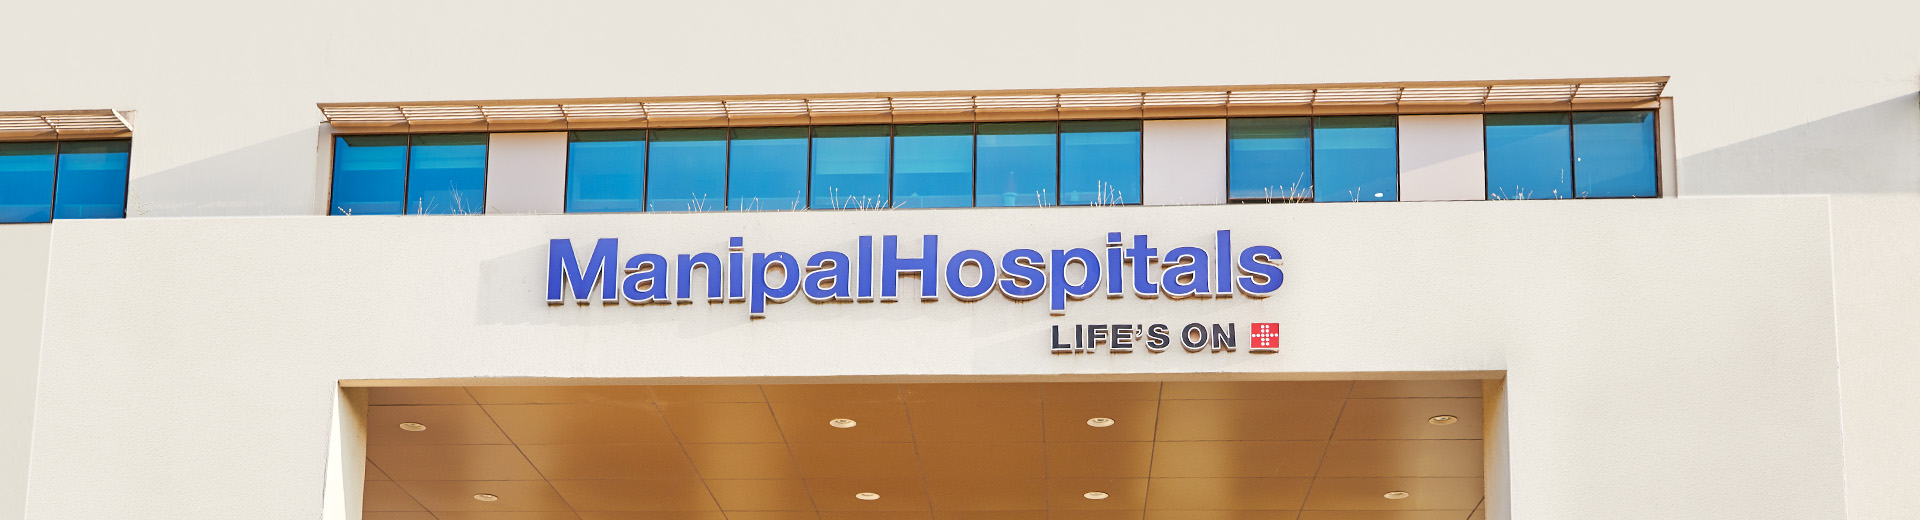 Privacy Policy | Manipal Hospitals Varthur Road, Whitefield